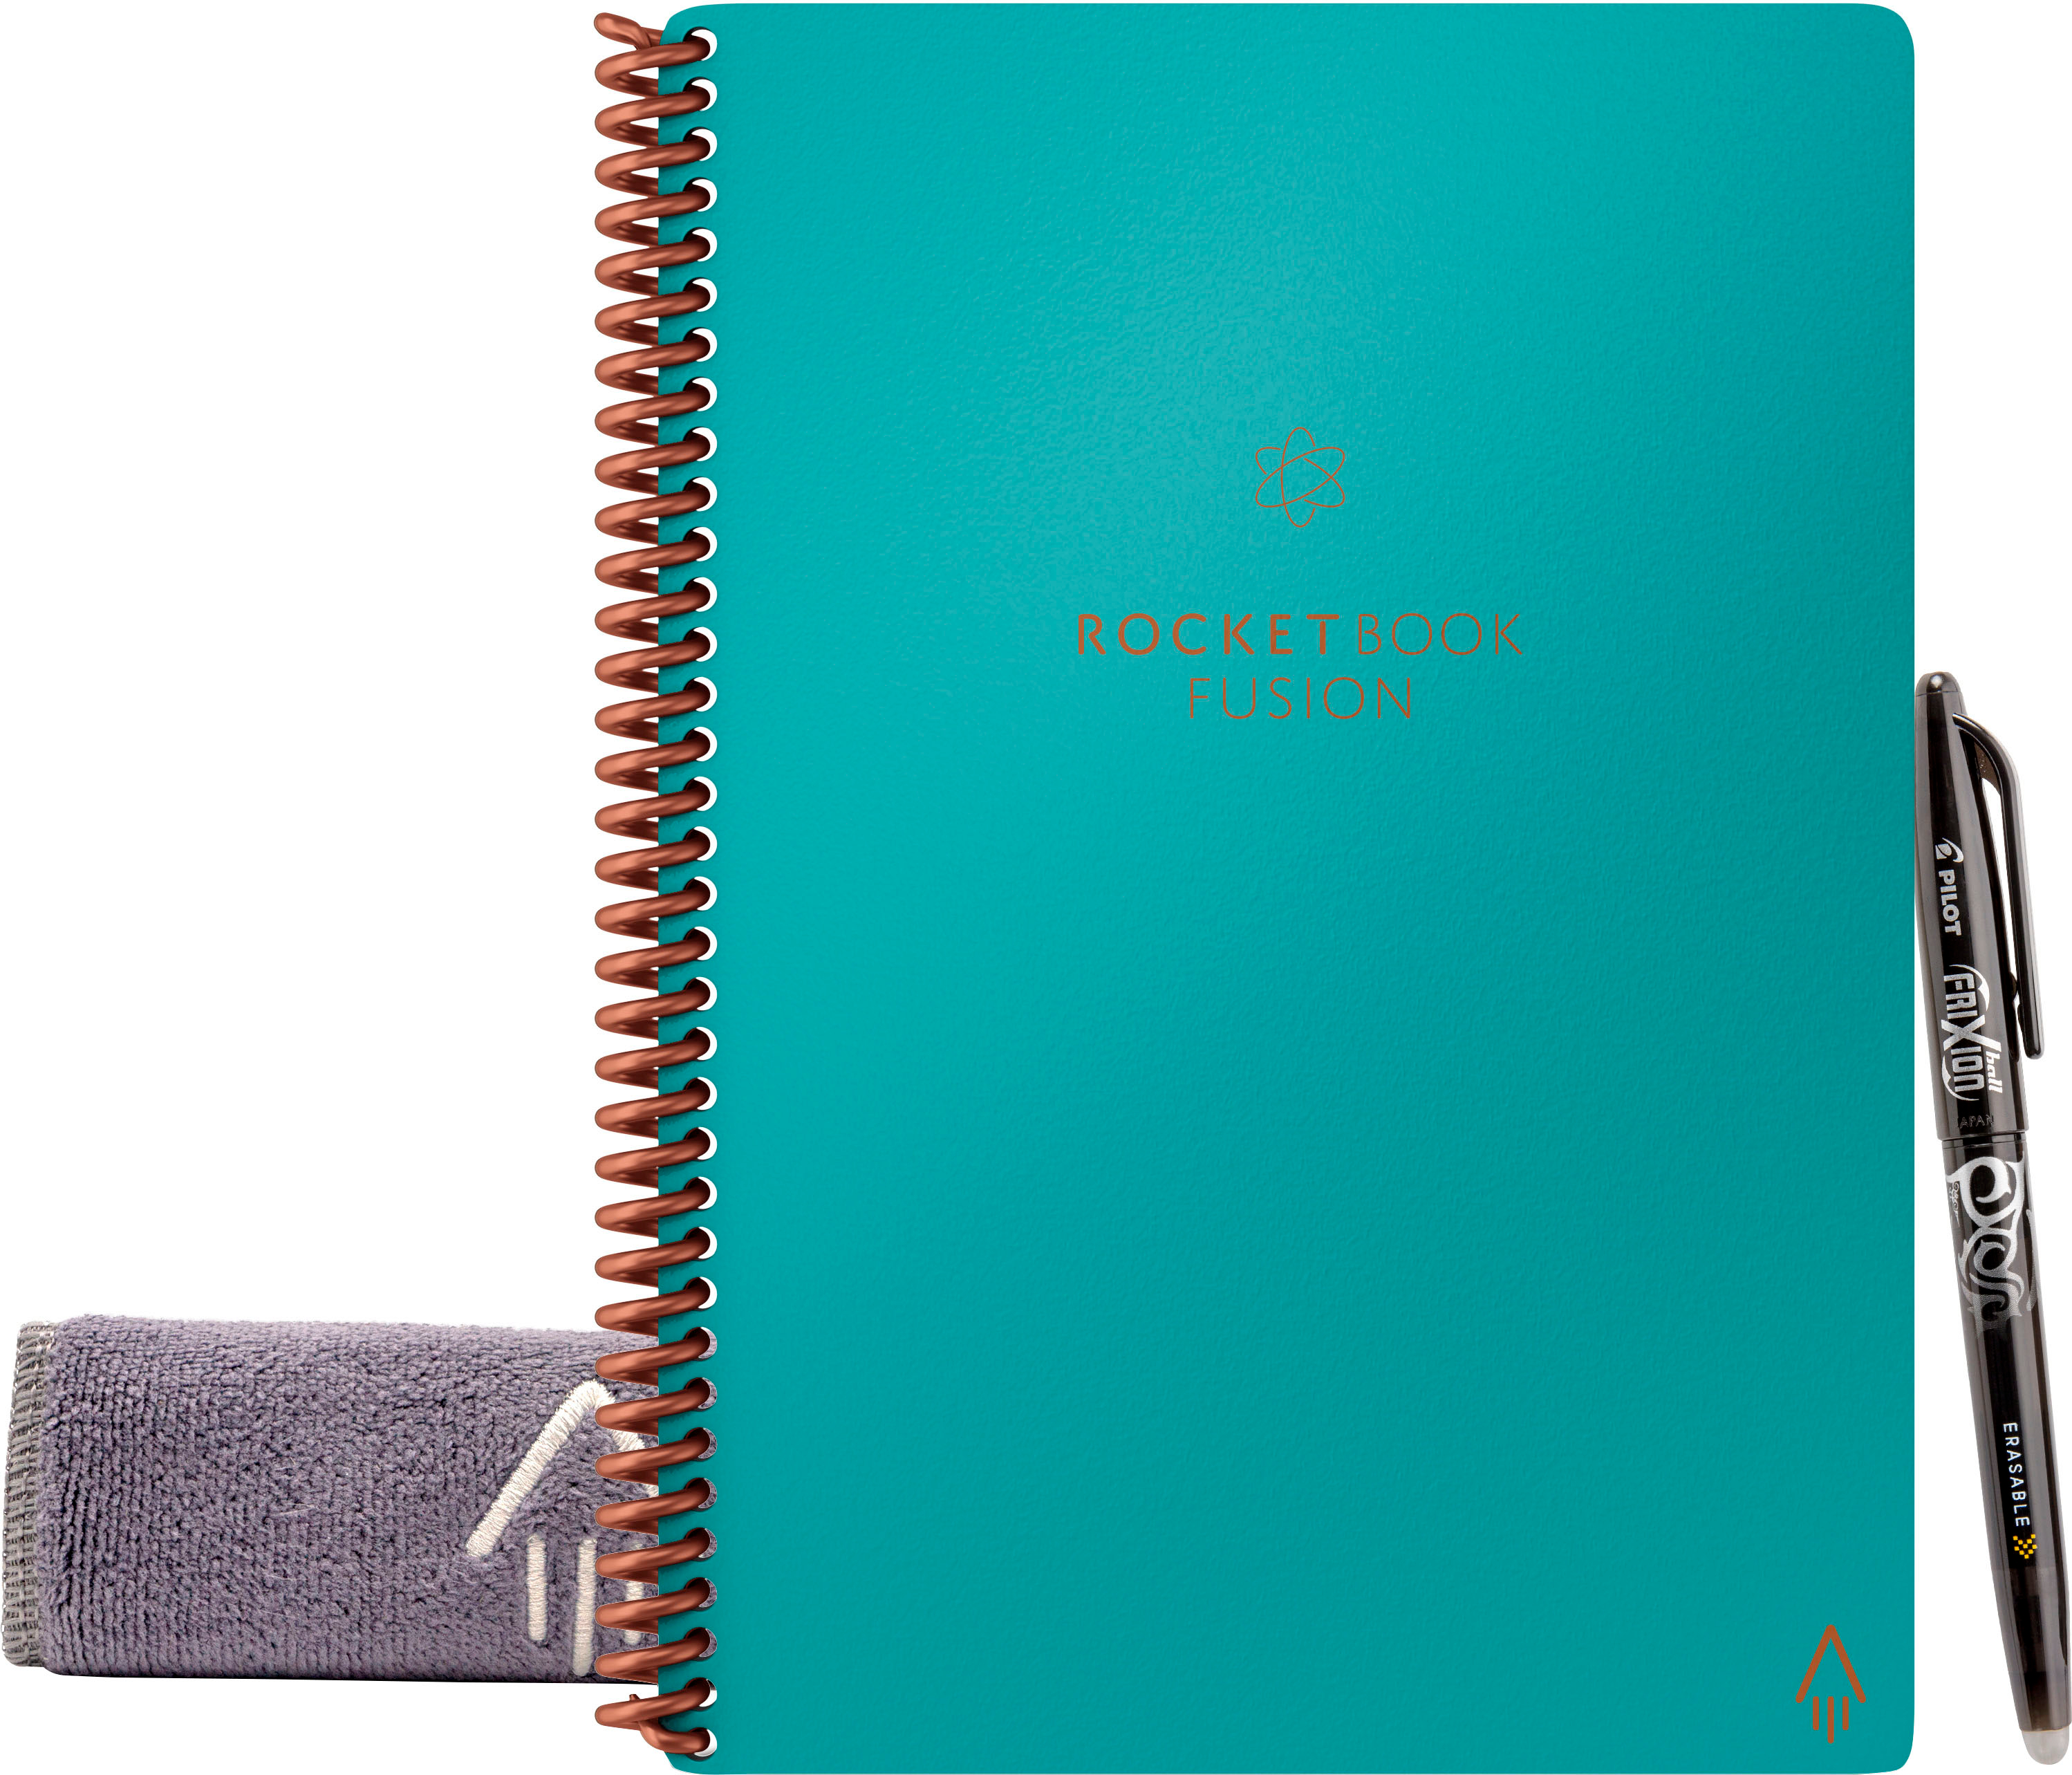 Rocketbook - Fusion Smart Reusable Notebook 7 Page Styles 6" x 8.8" - Neptune Teal